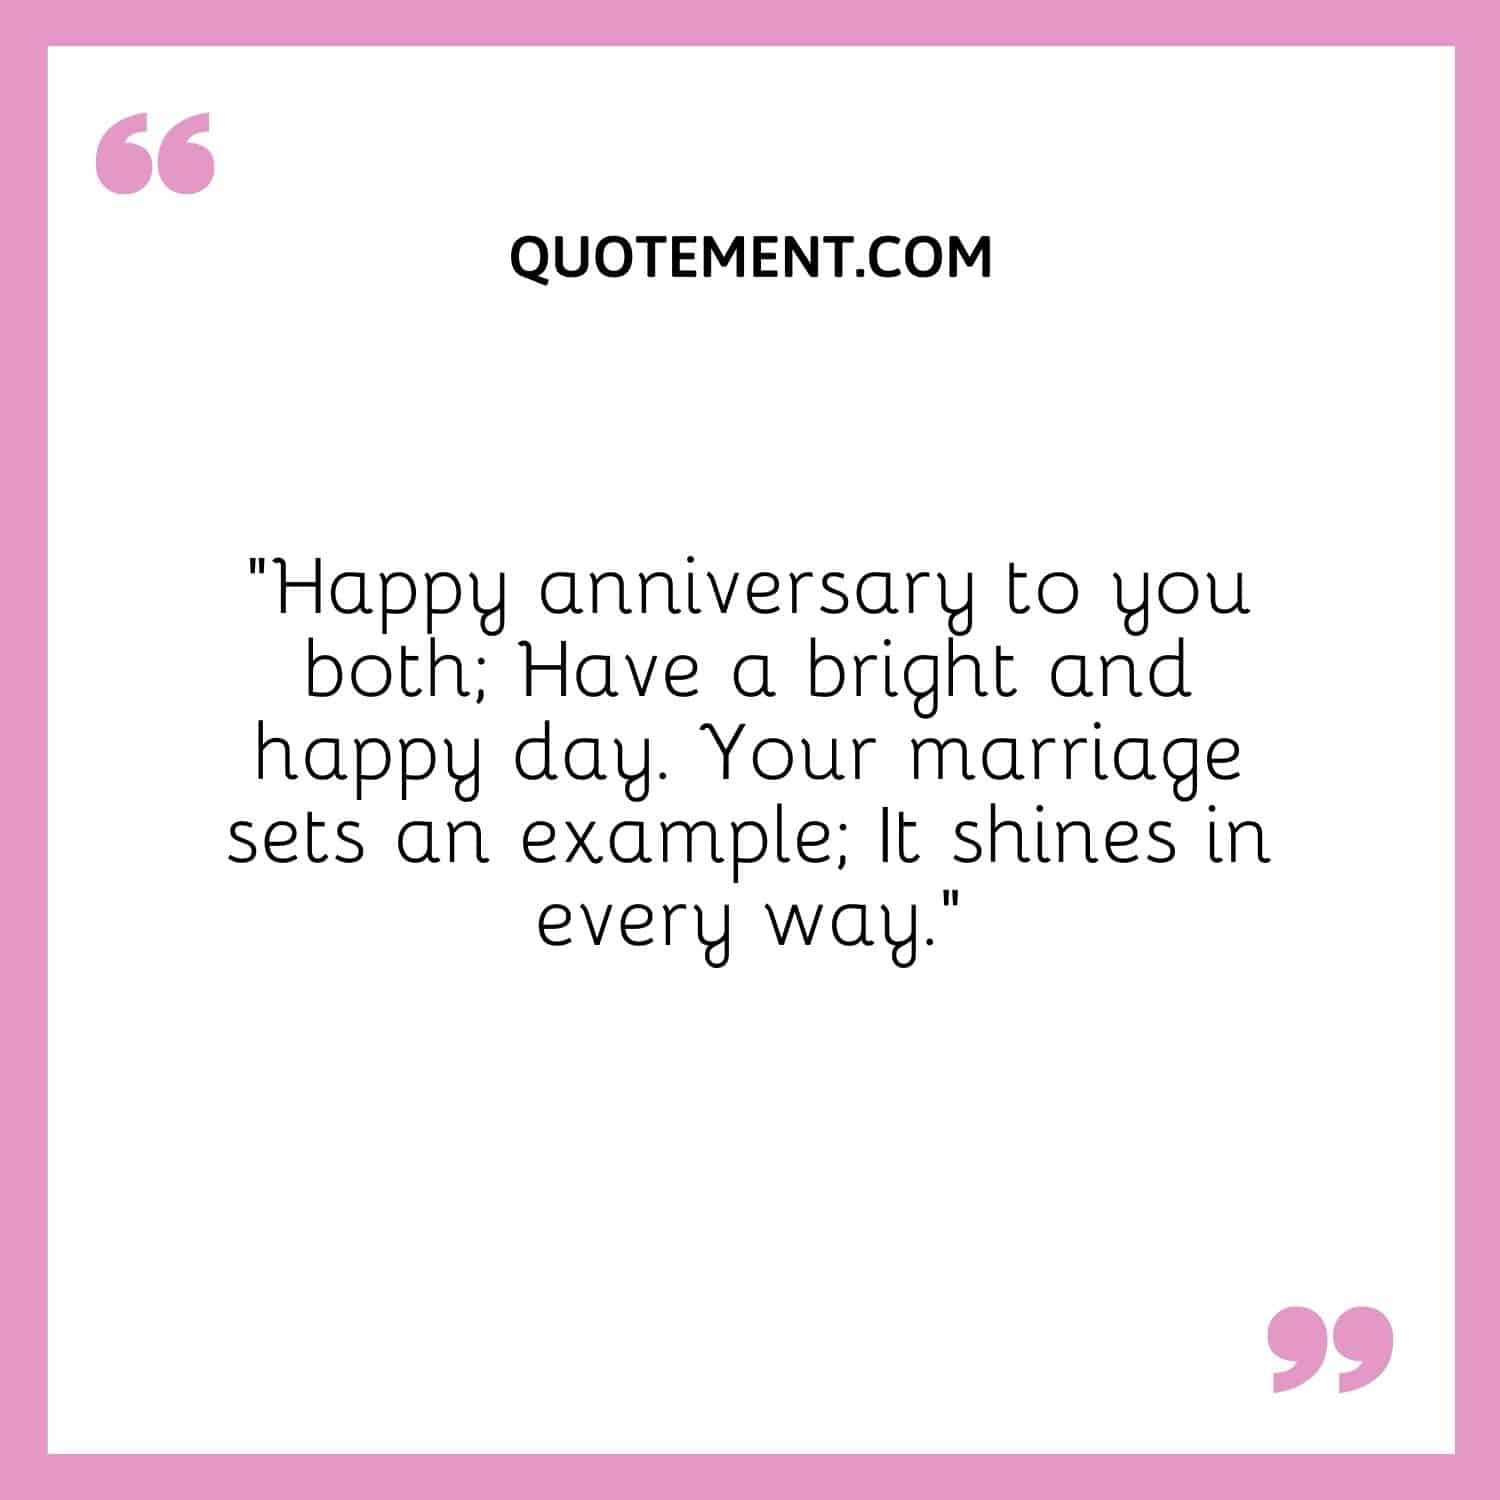 Happy anniversary to you both; Have a bright and happy day